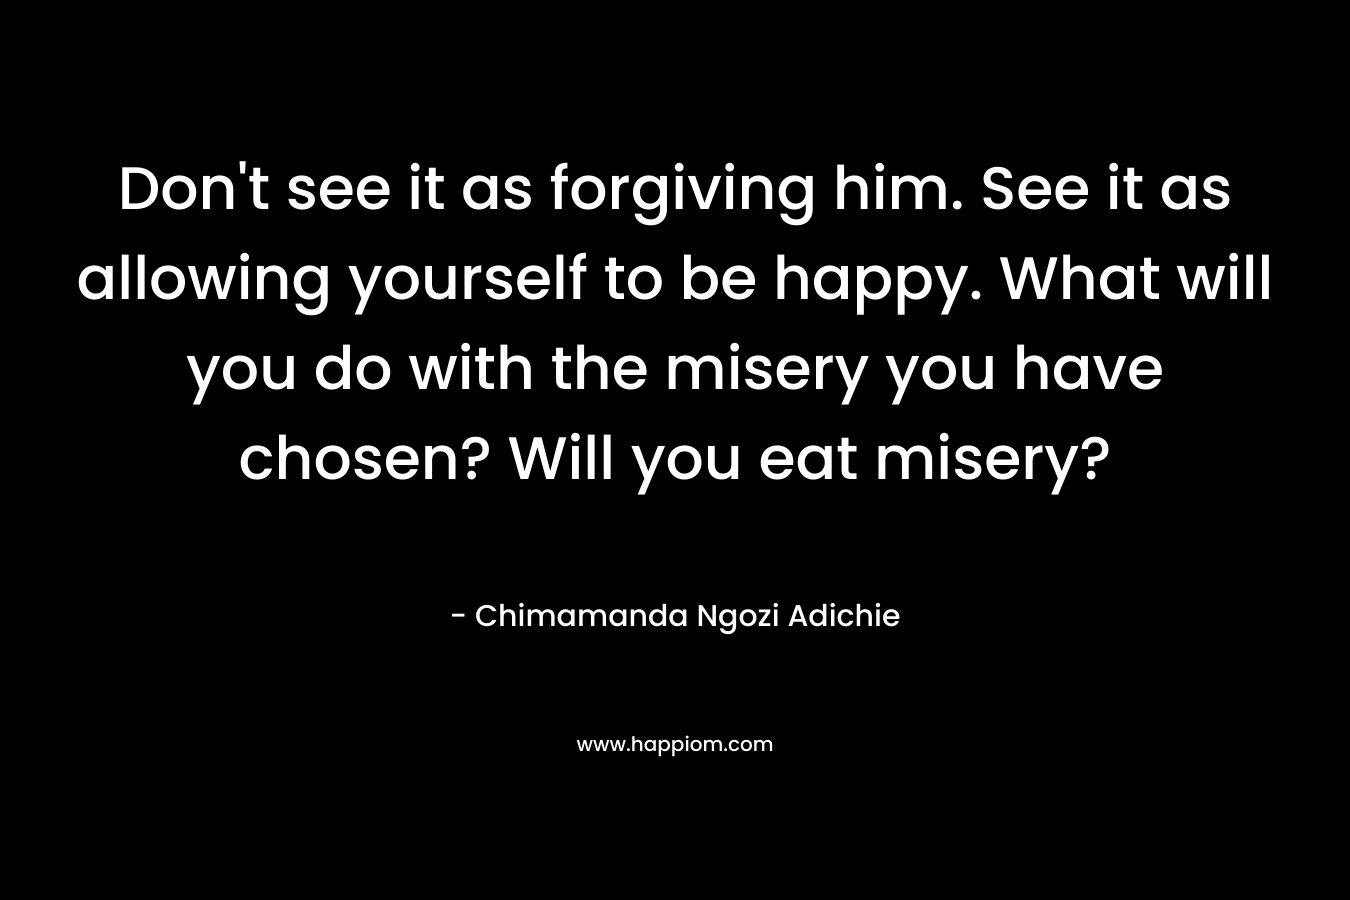 Don't see it as forgiving him. See it as allowing yourself to be happy. What will you do with the misery you have chosen? Will you eat misery?